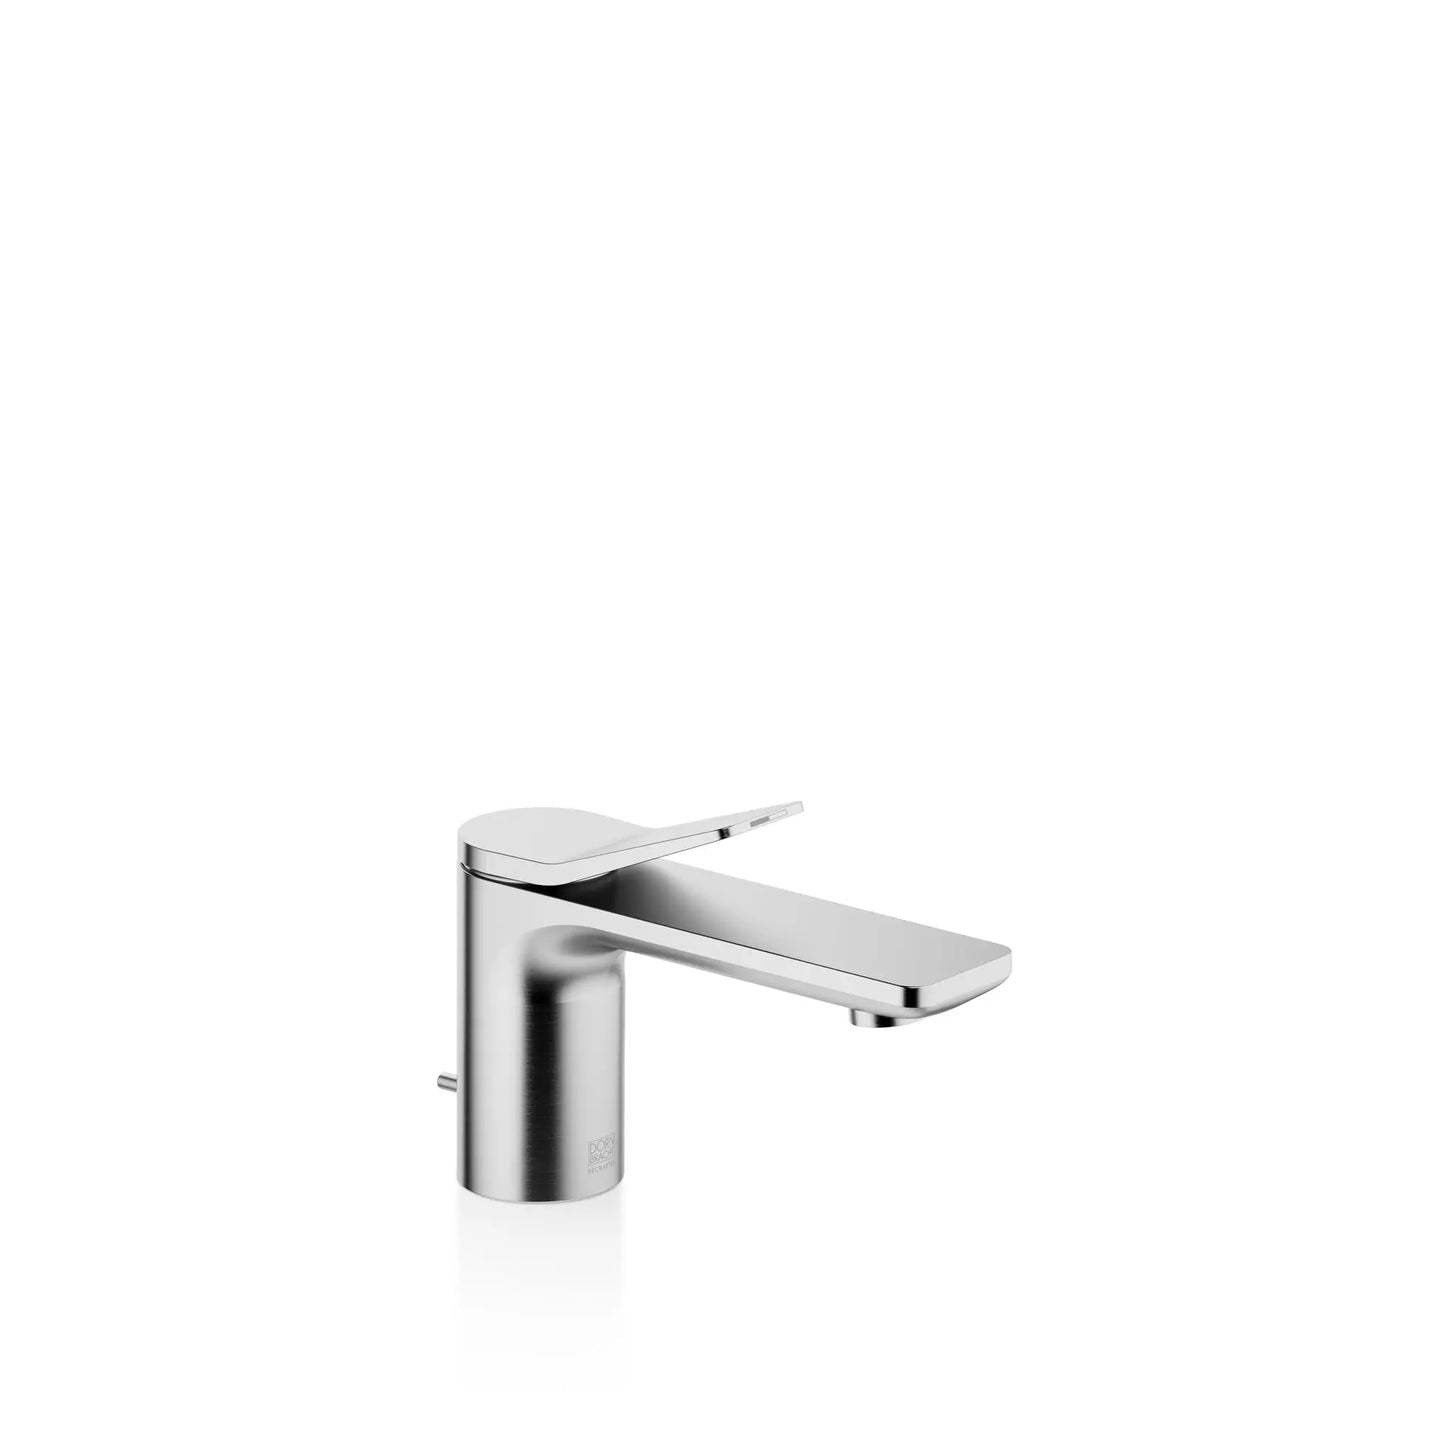 LISSÉ Single-lever basin mixer with pop-up waste 